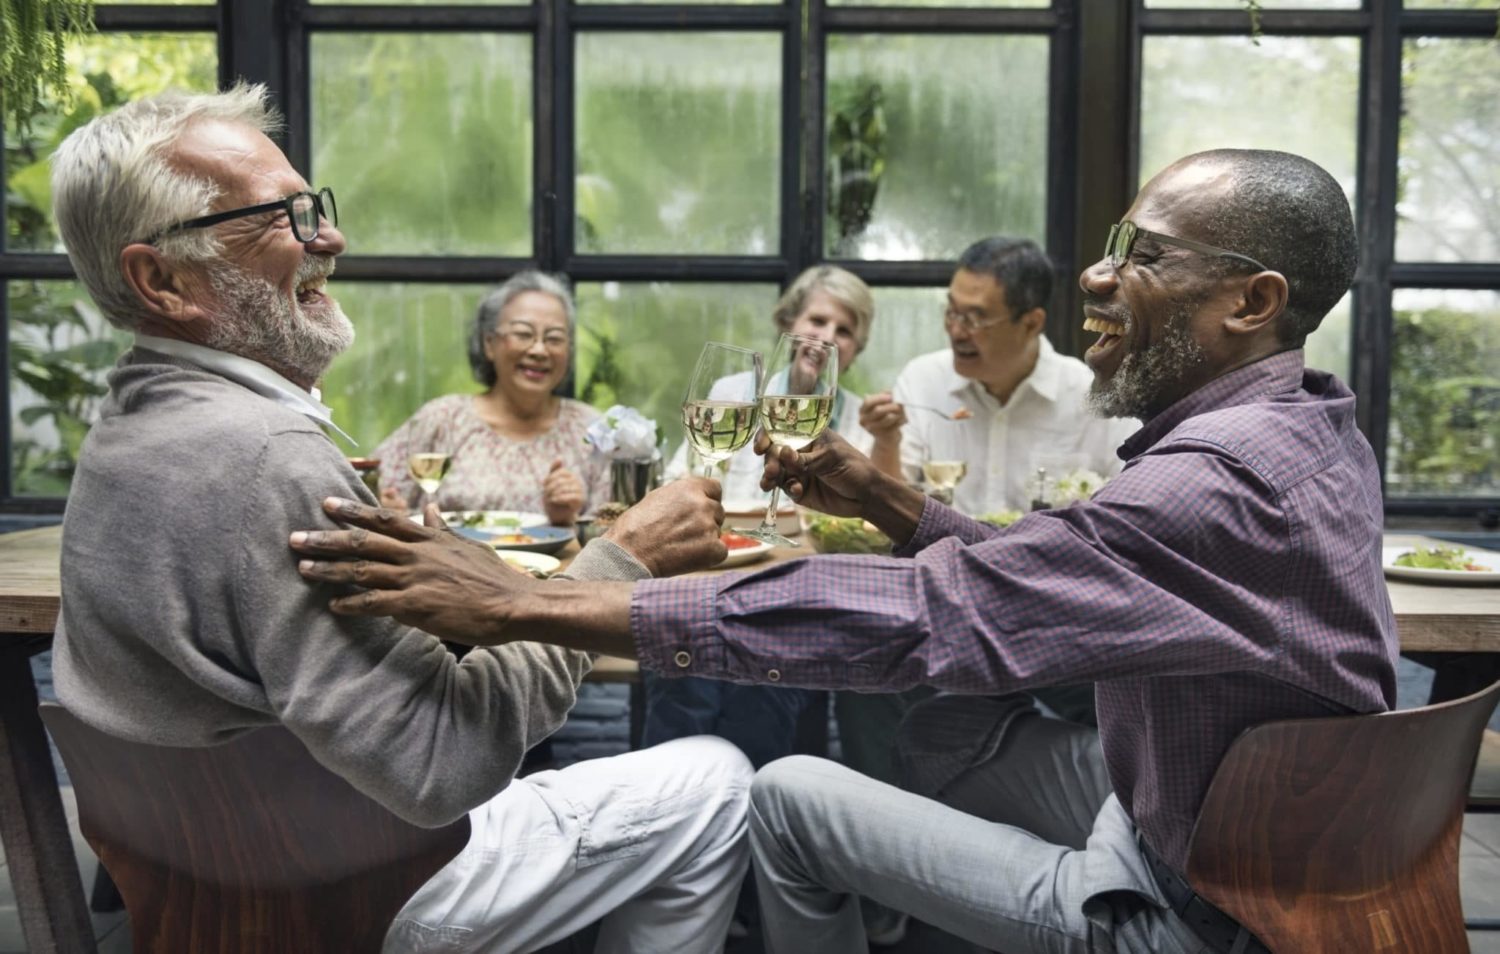 A group of seniors in St. Louis, MO share conversion and laughter over dinner thanks to their hearing aids.